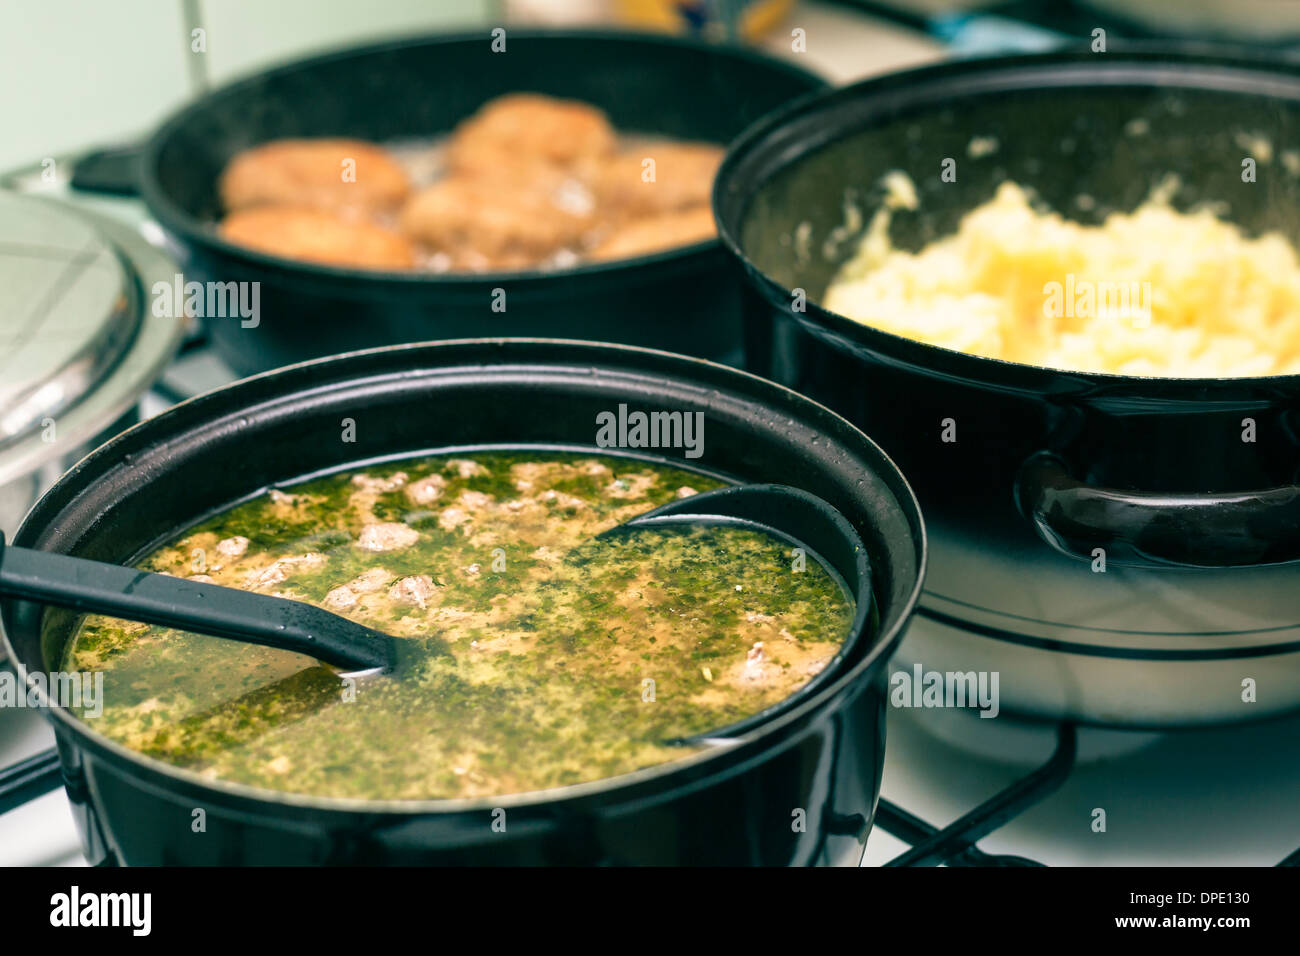 Cooking lunch on cooker at home, Czech Republic. Stock Photo